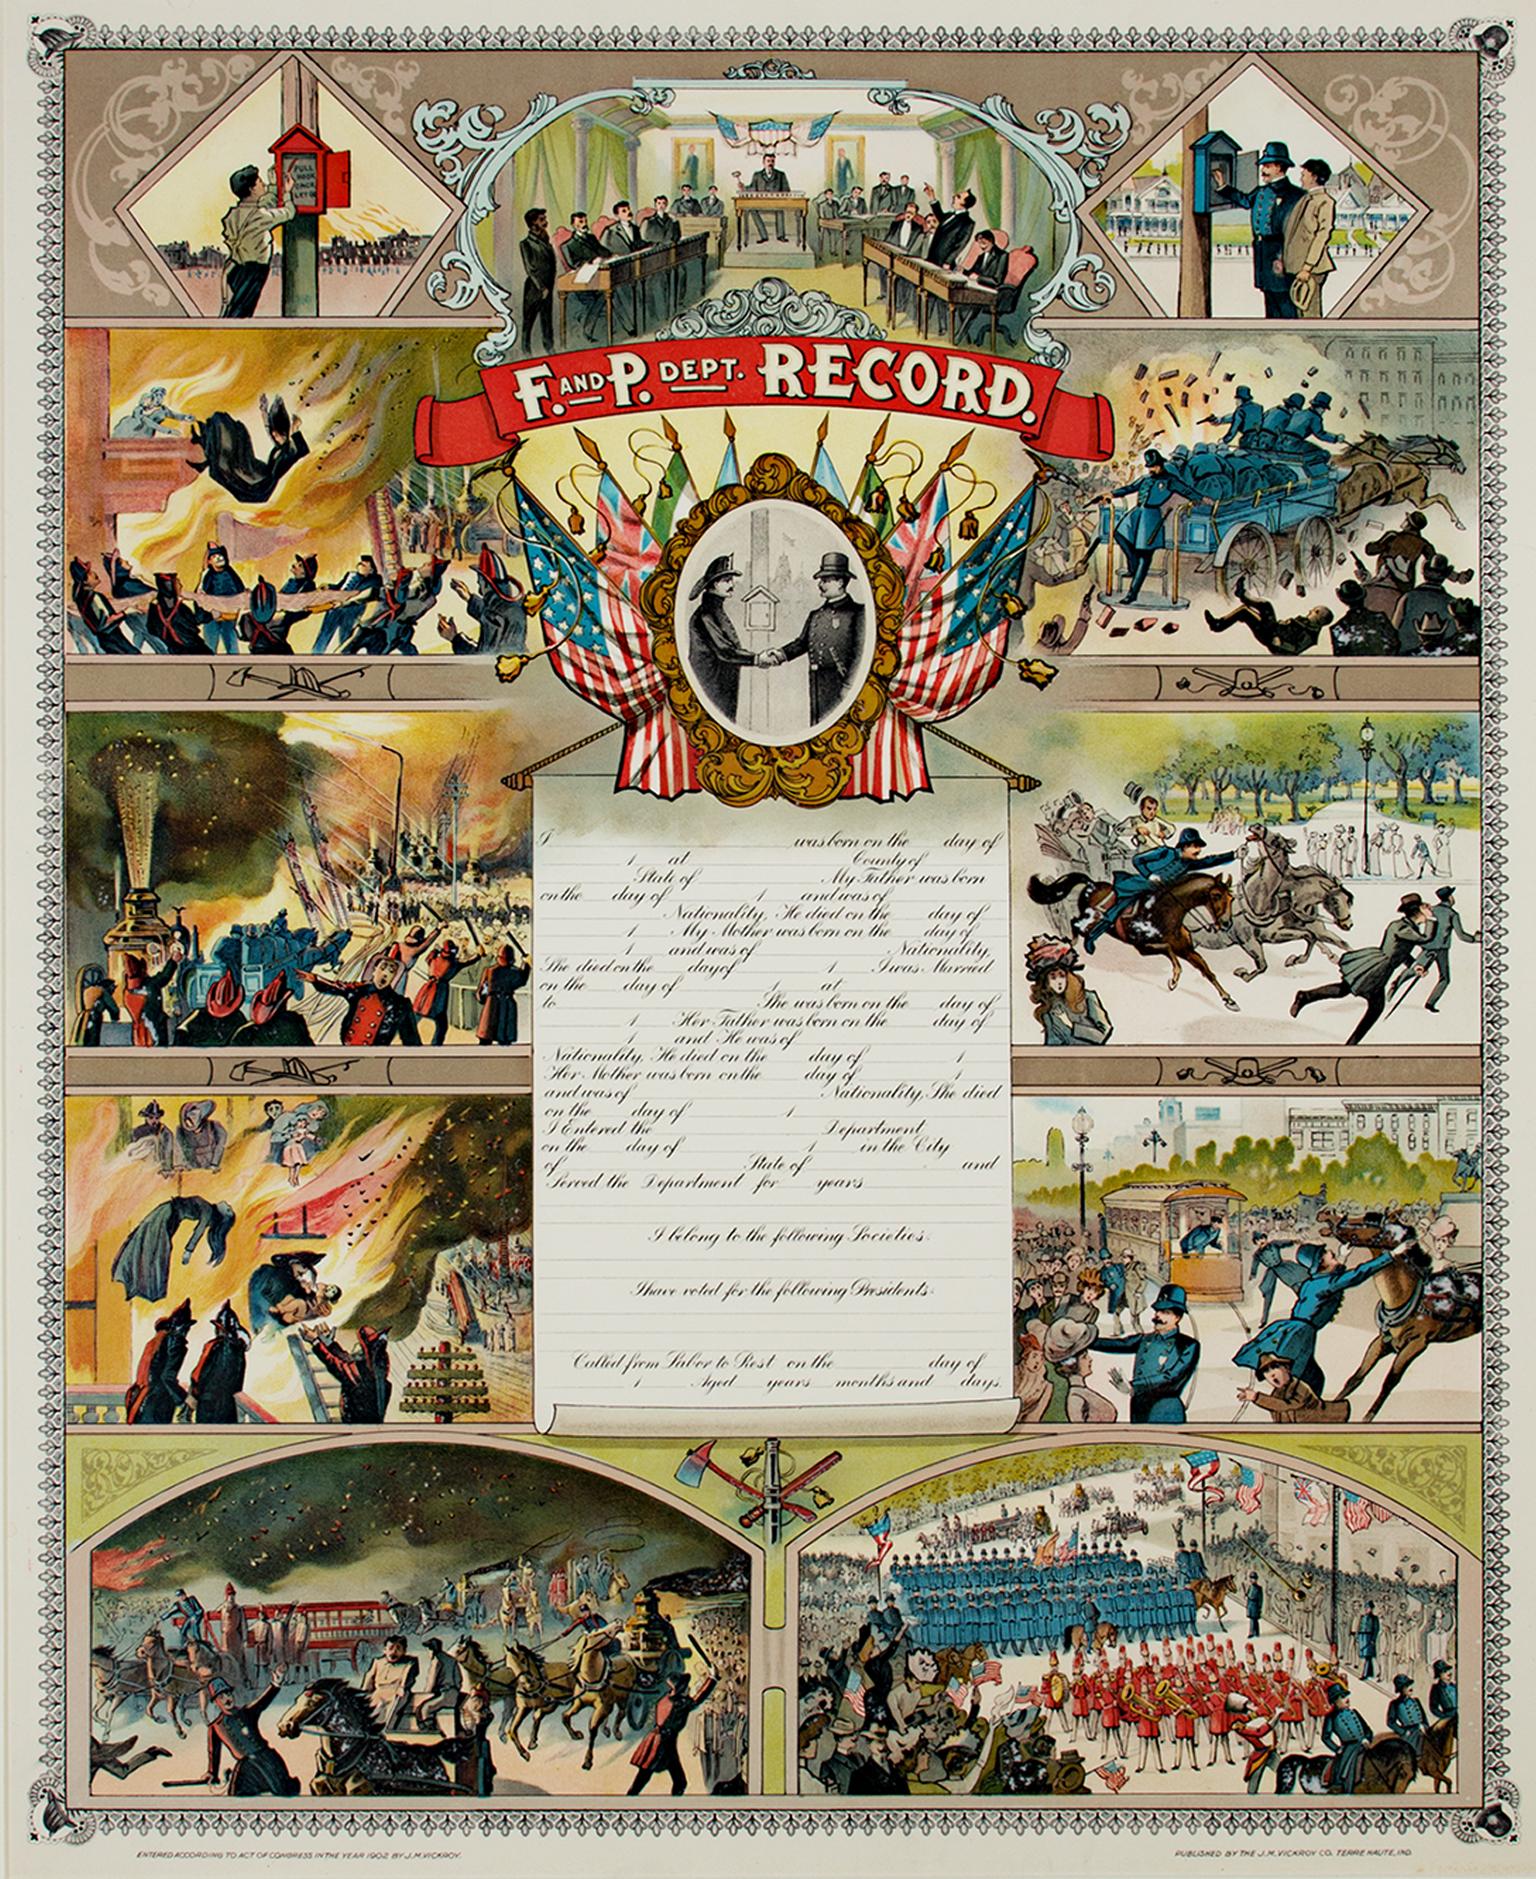 J.M. Vickroy & Co. Figurative Print - "Fire and Police Department Record, " Chromolithograph by J.M. Vickroy & Co